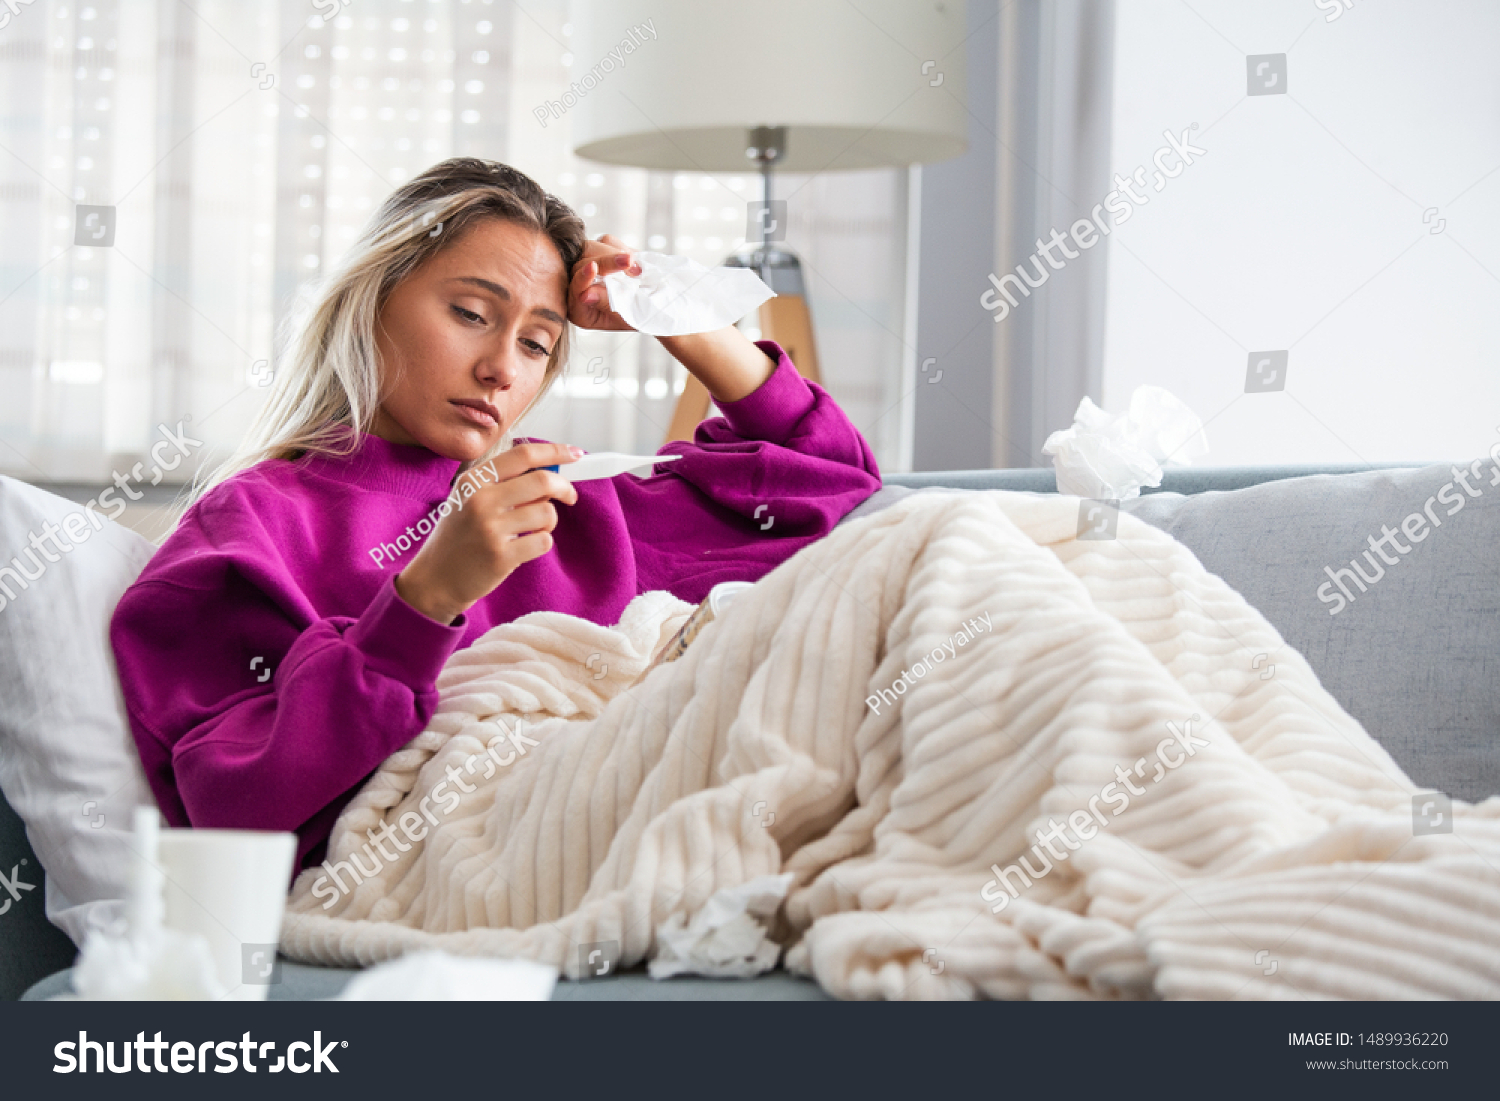 Sickness, seasonal virus problem concept. Woman being sick having flu lying on sofa looking at temperature on thermometer. Sick woman lying in bed with high fever. Cold flu and migraine. #1489936220